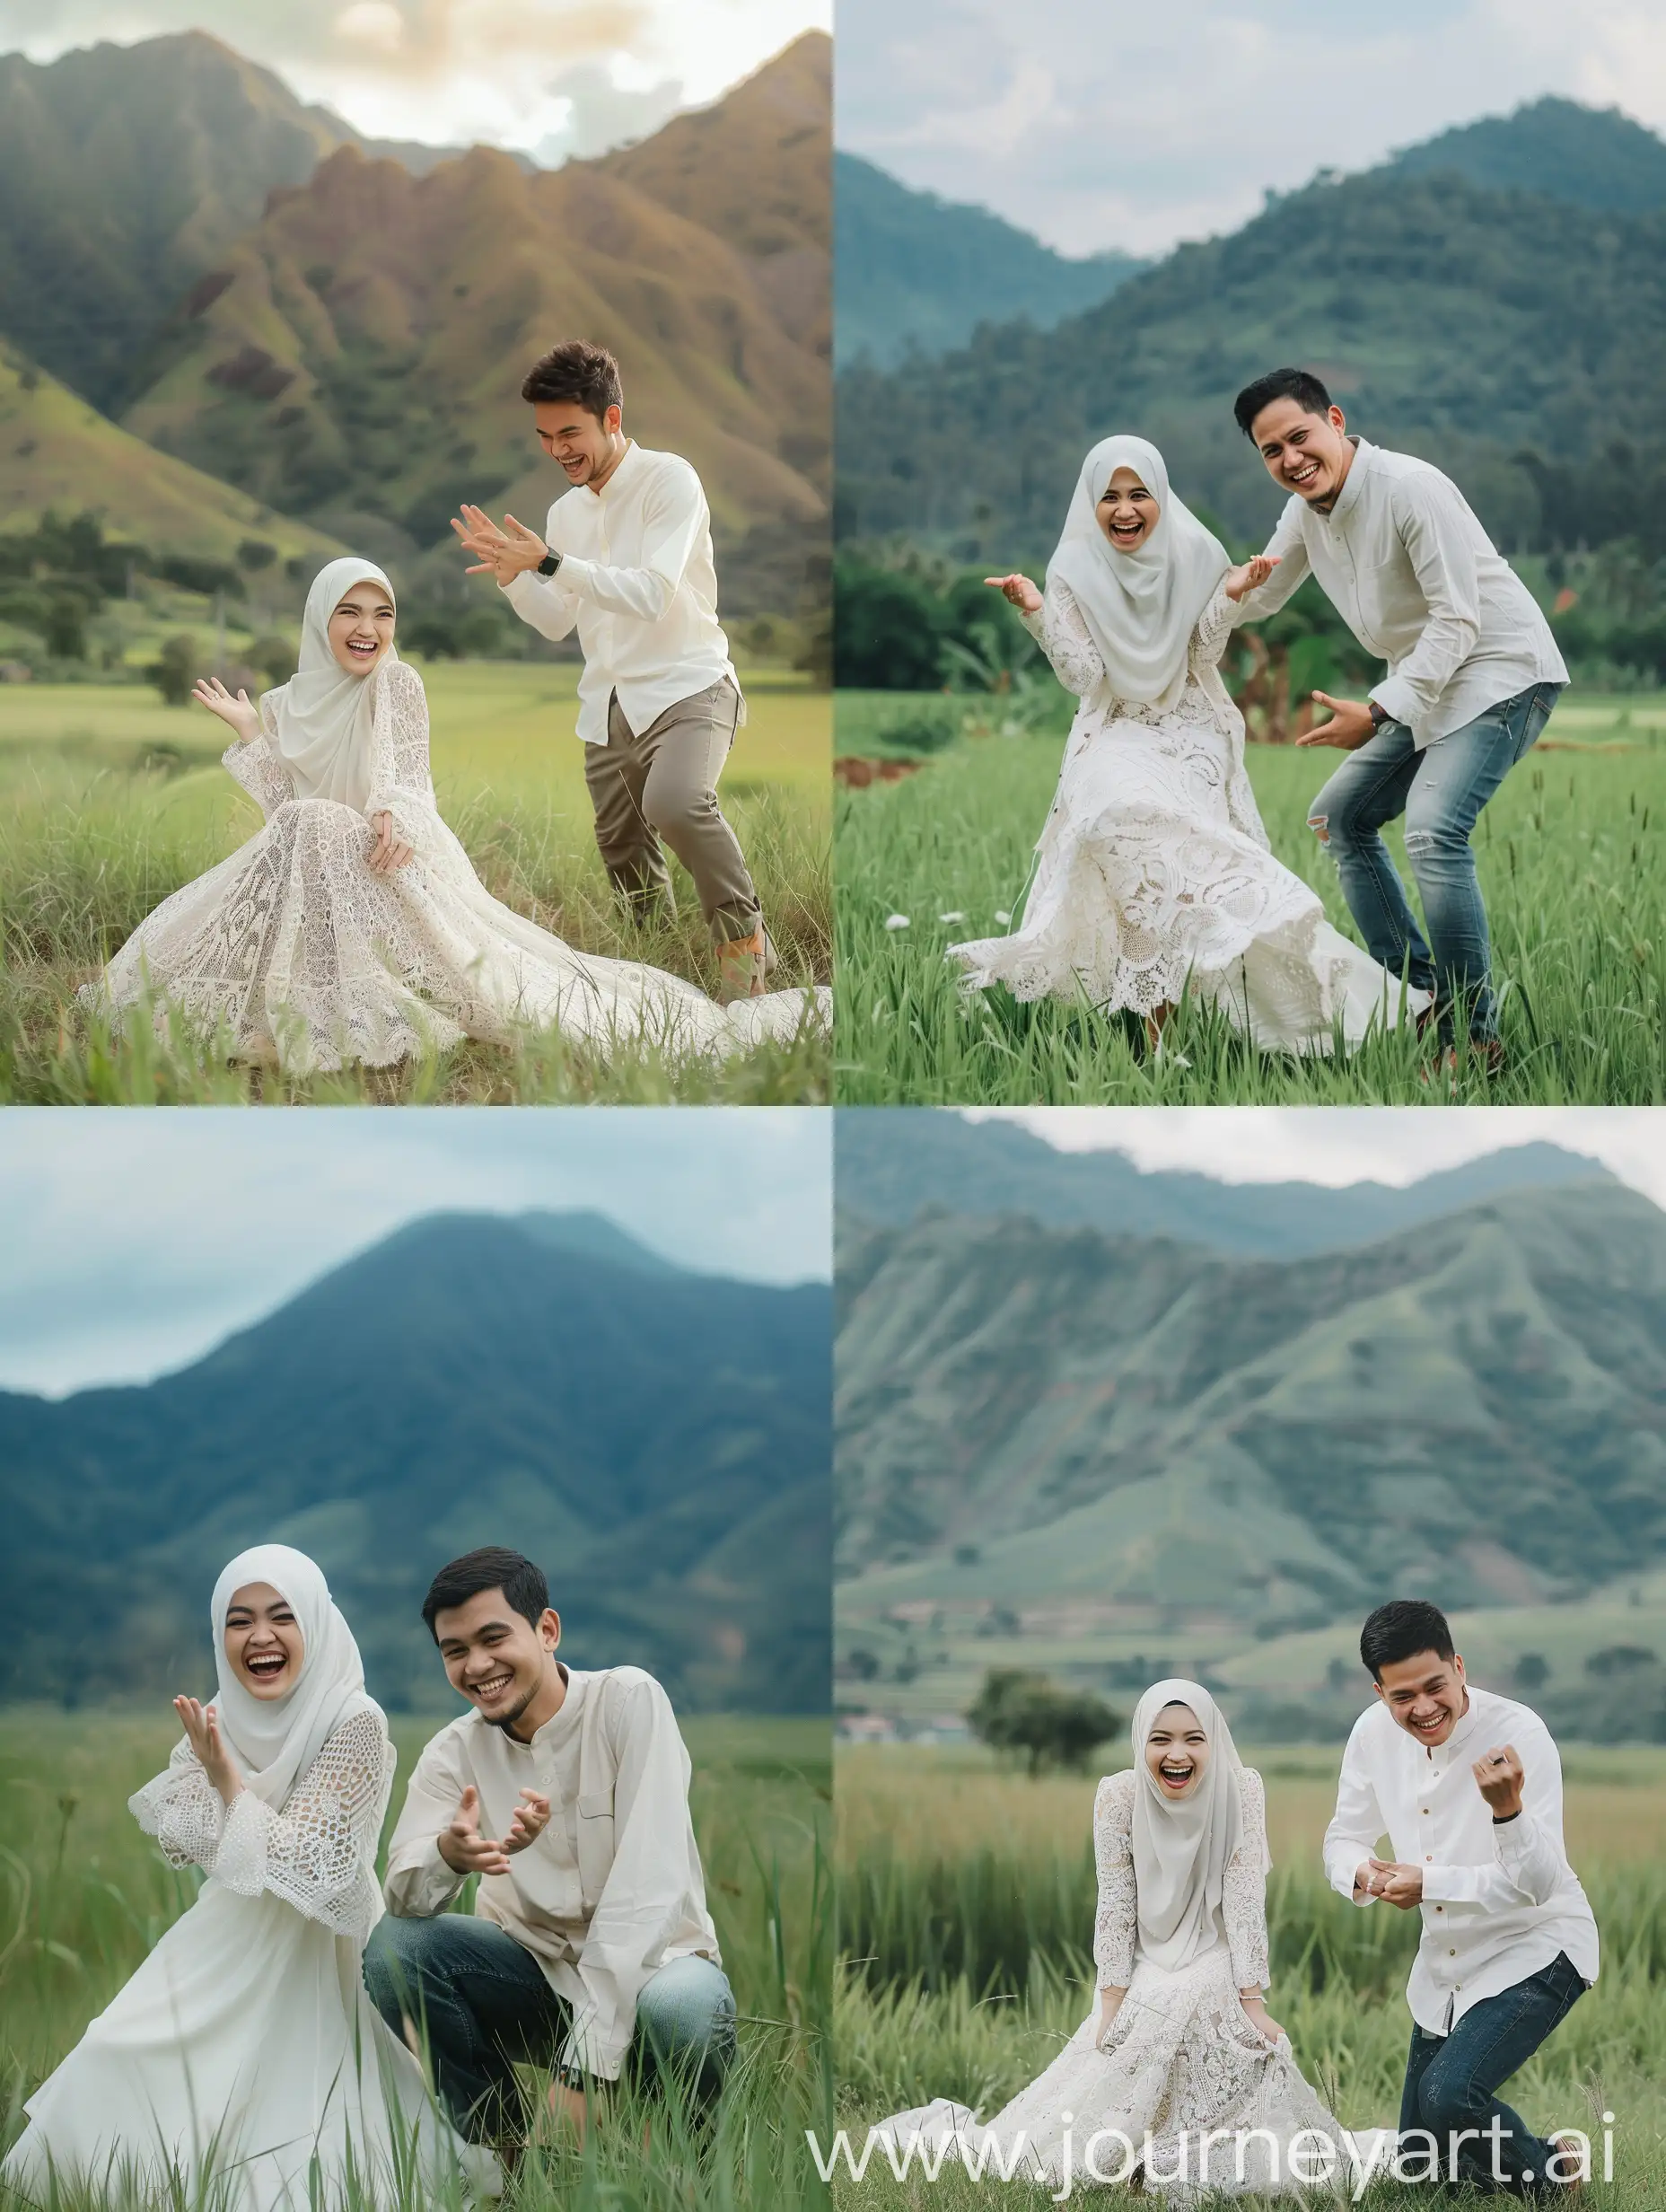 Indonesian-Couple-in-Traditional-Attire-Laughing-Together-in-Mountain-Meadow